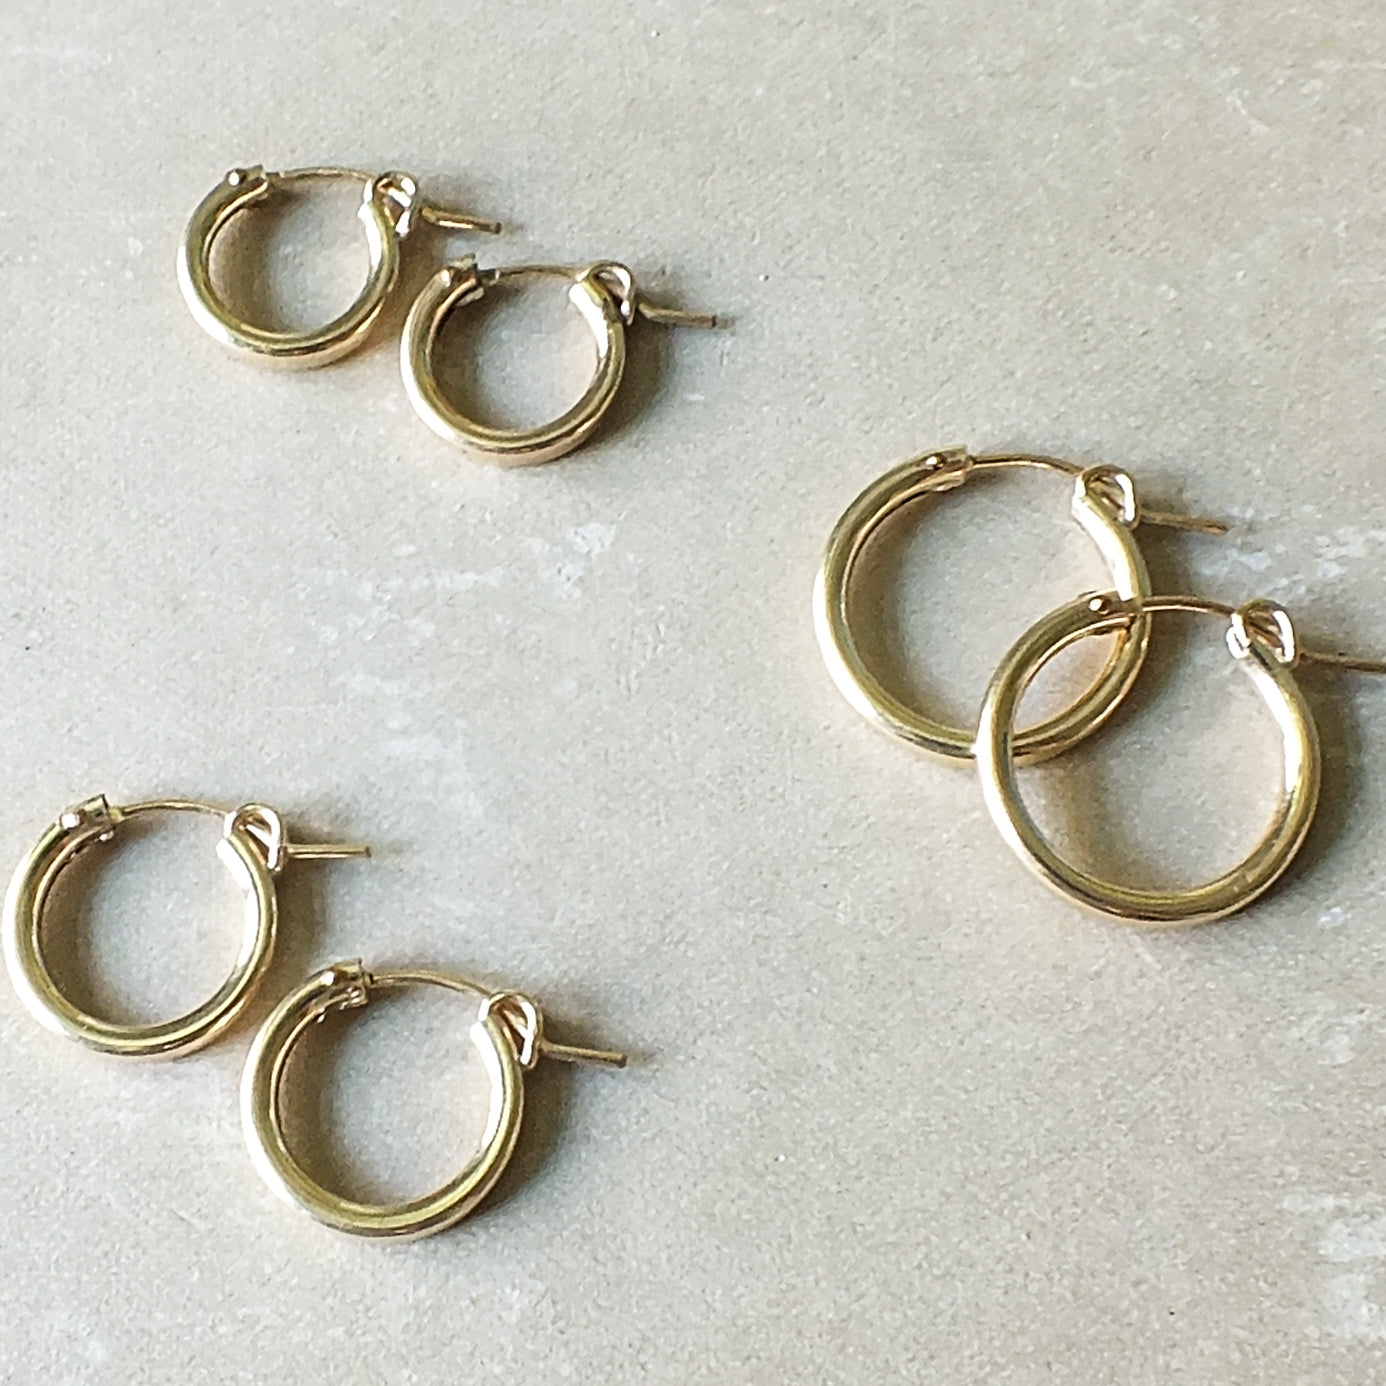 A set of Becoming Jewelry Everyday Hoop Earrings, small on a gray surface.